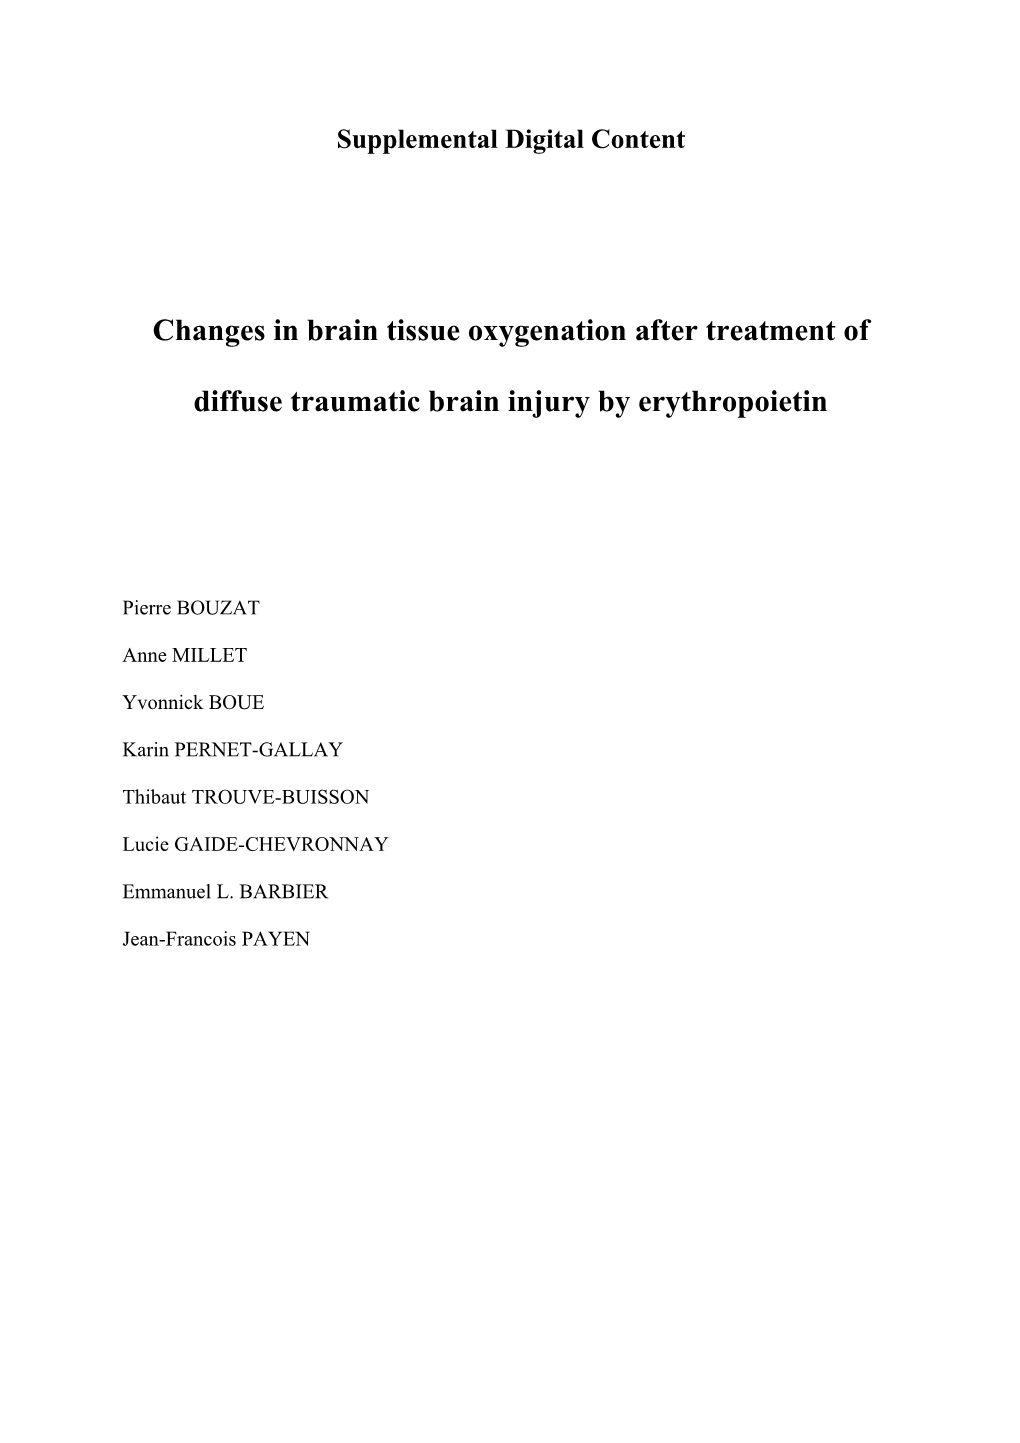 Changes in Brain Tissue Oxygenation After Treatment of Diffuse Traumatic Brain Injury